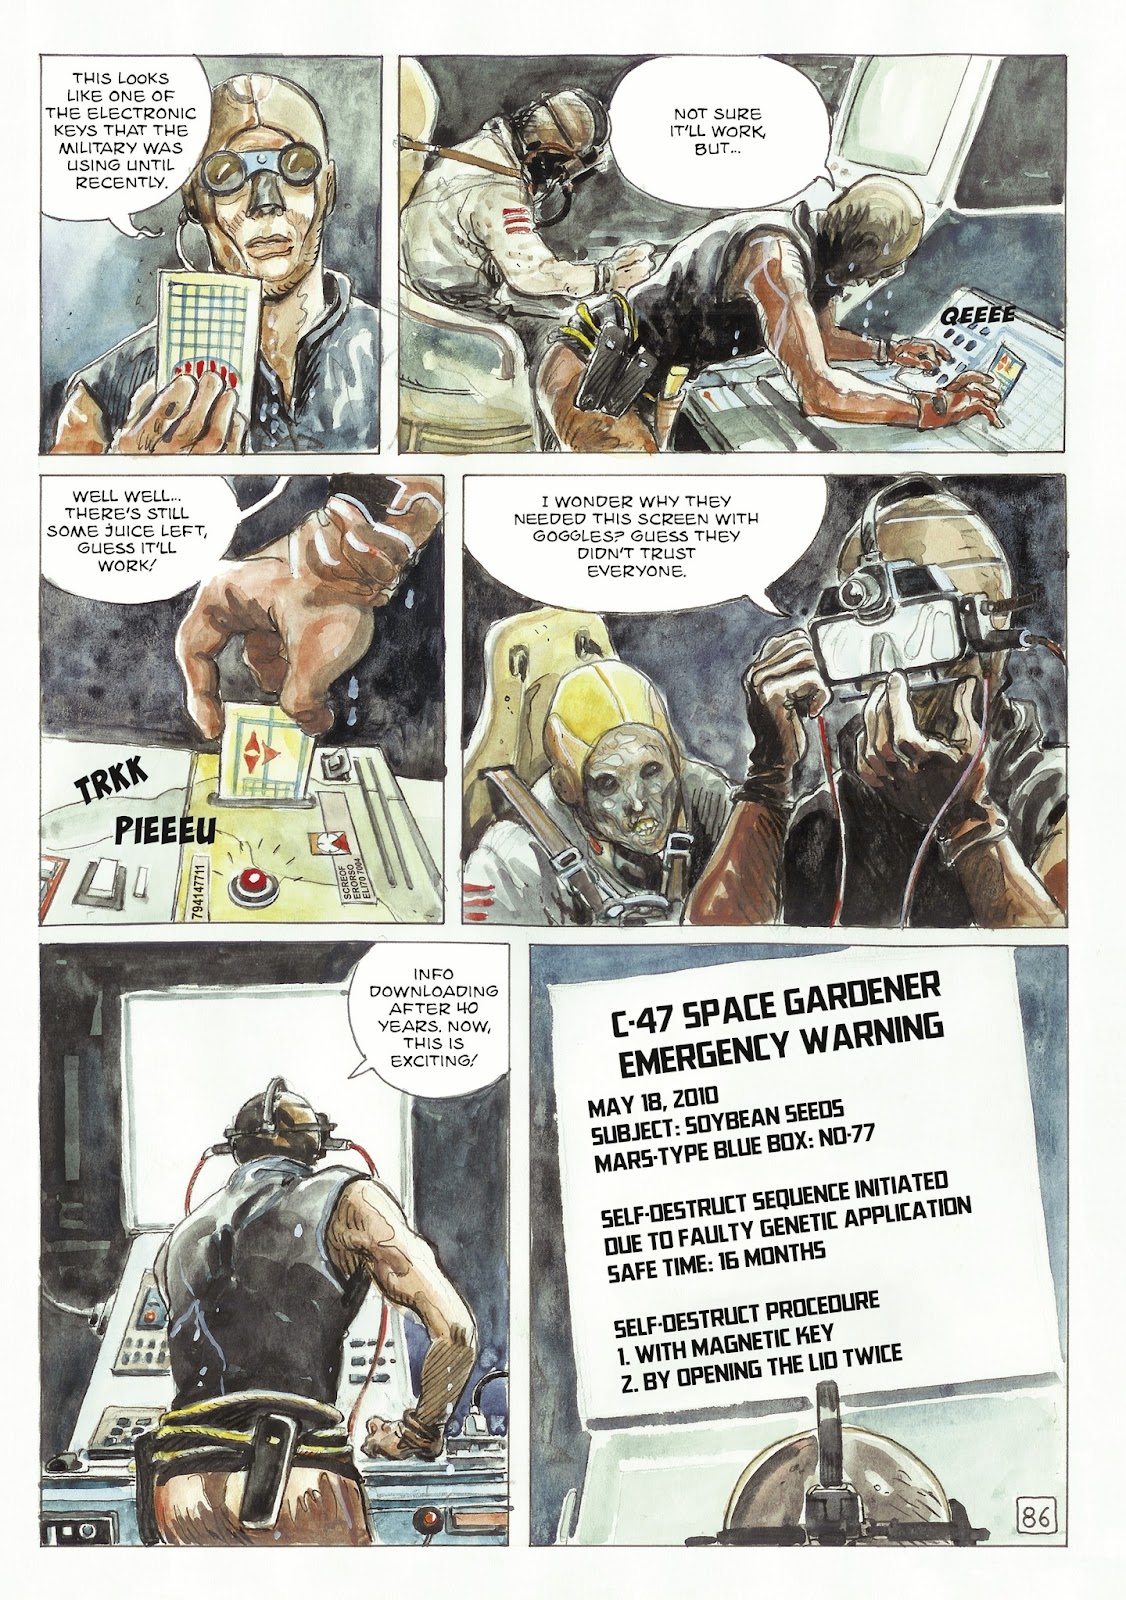 The Man With the Bear issue 2 - Page 32